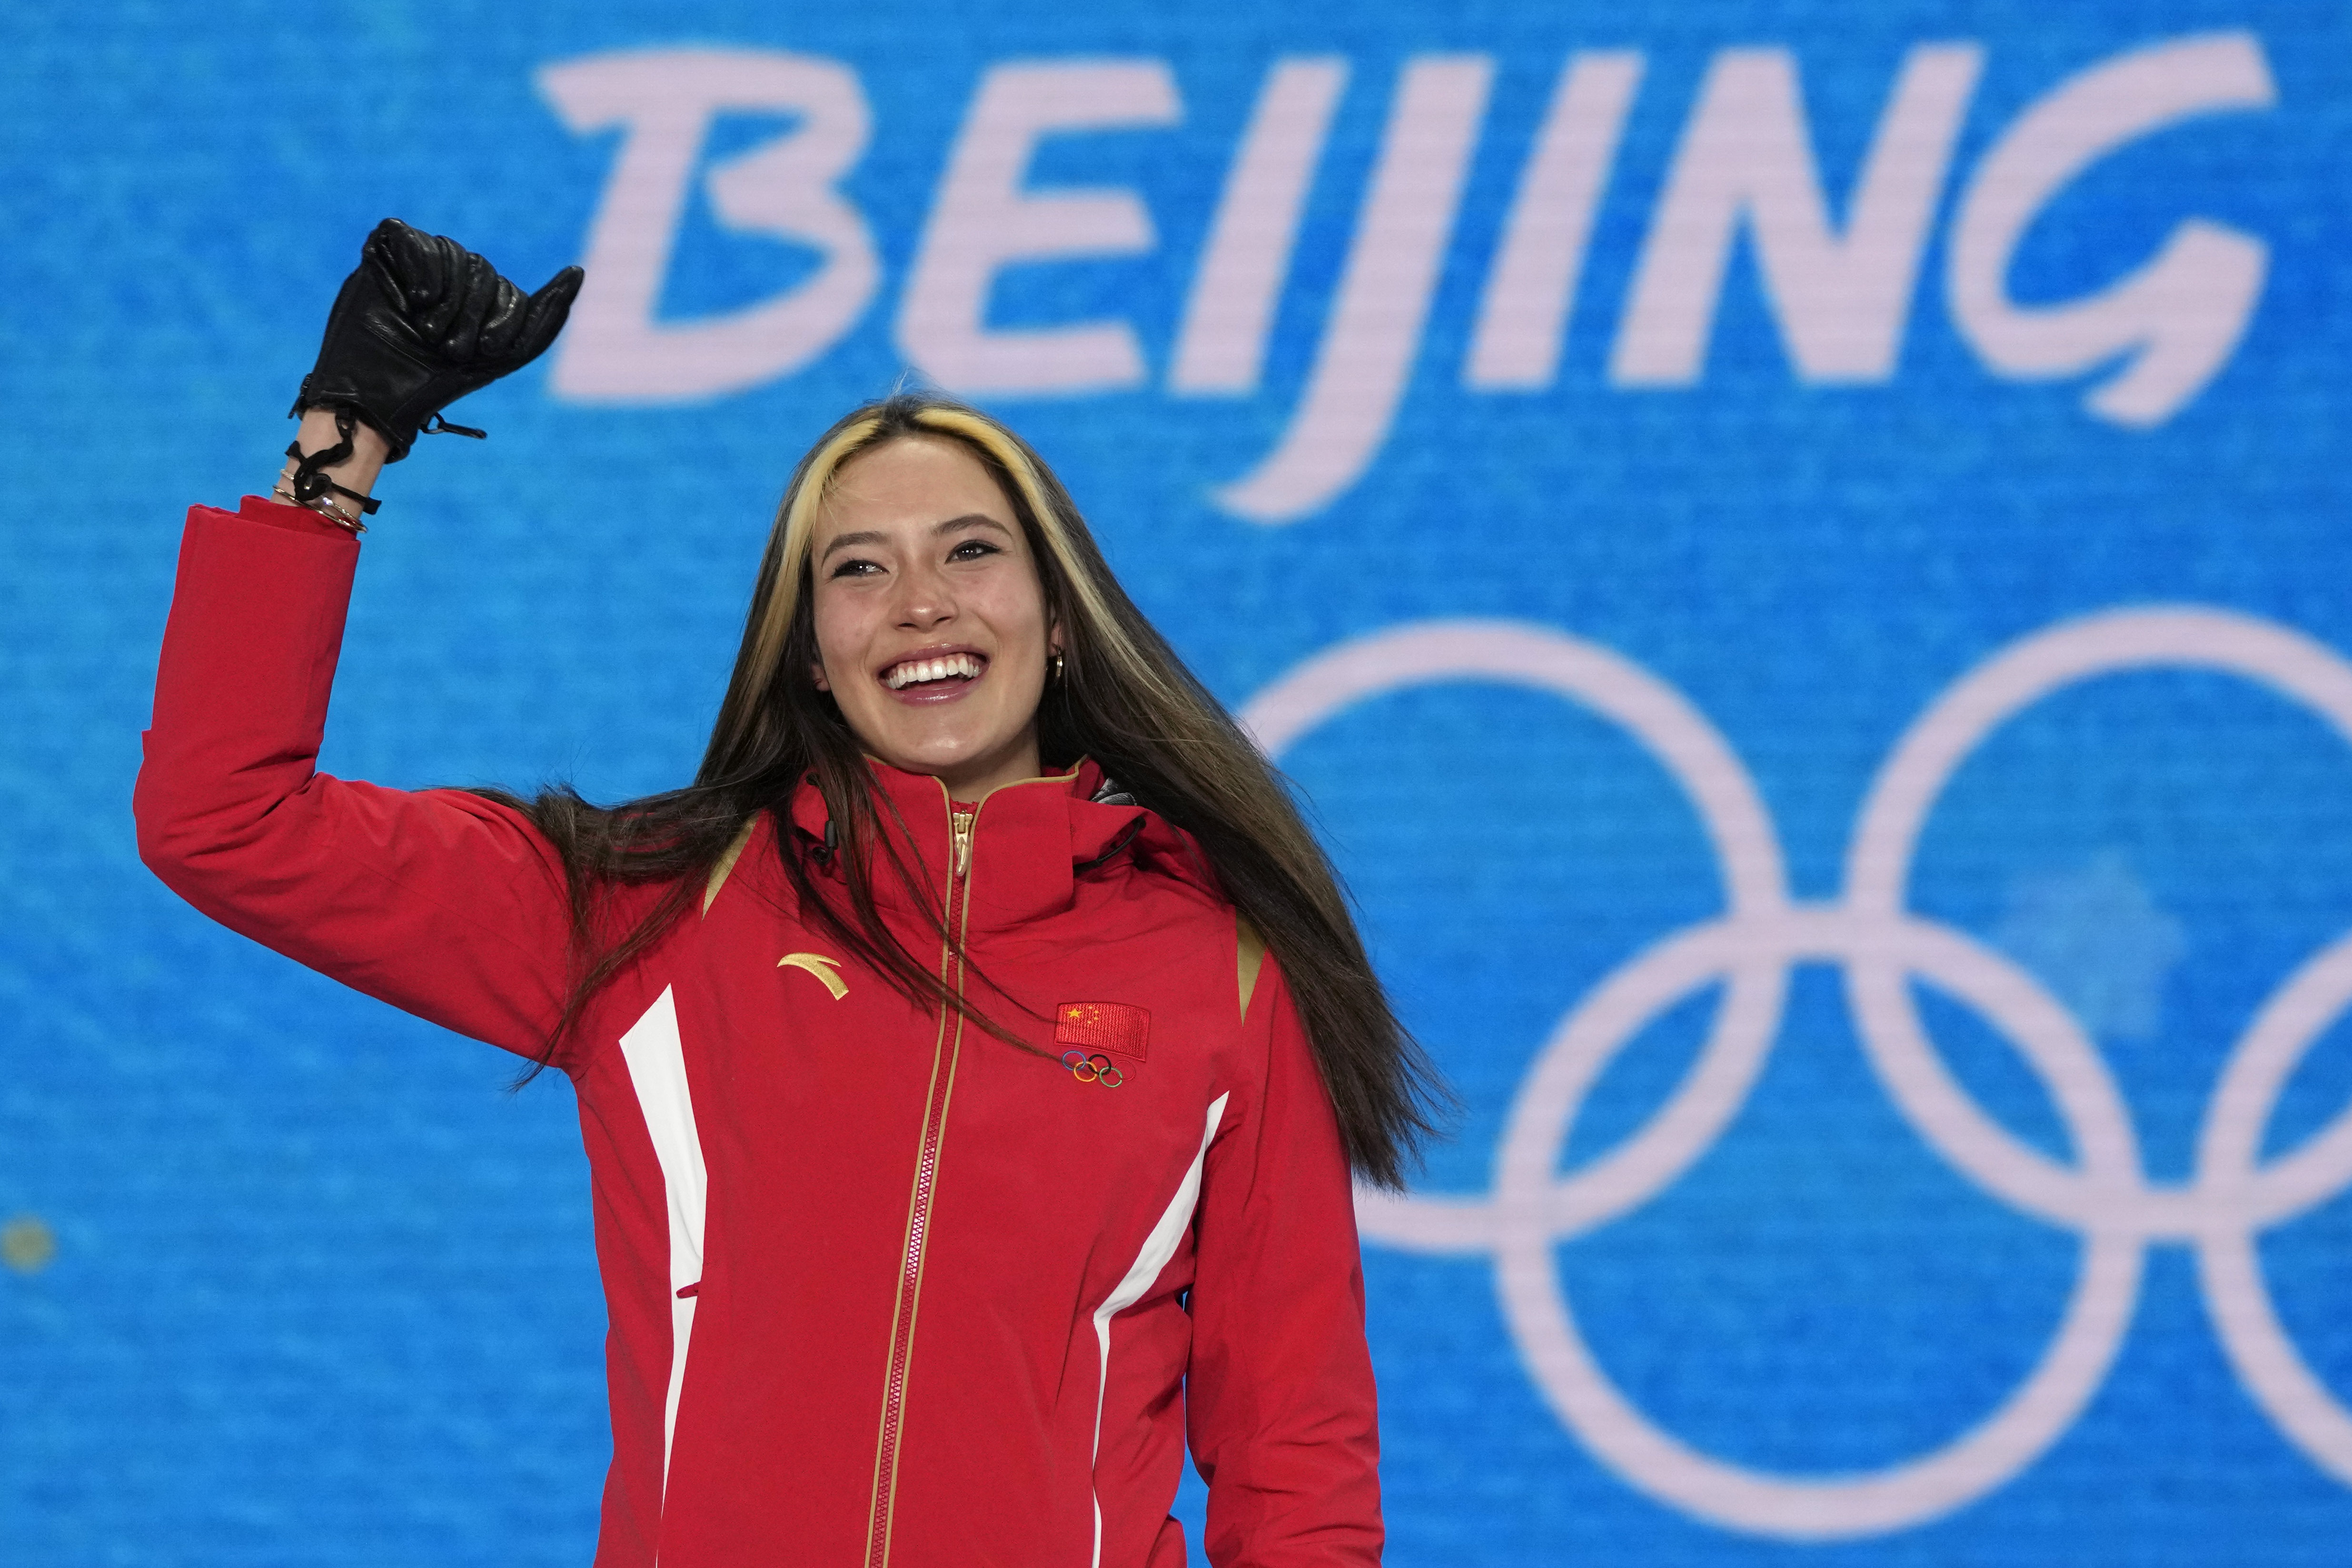 Two-time gold medallist Eileen Gu signs on to work for Salt Lake